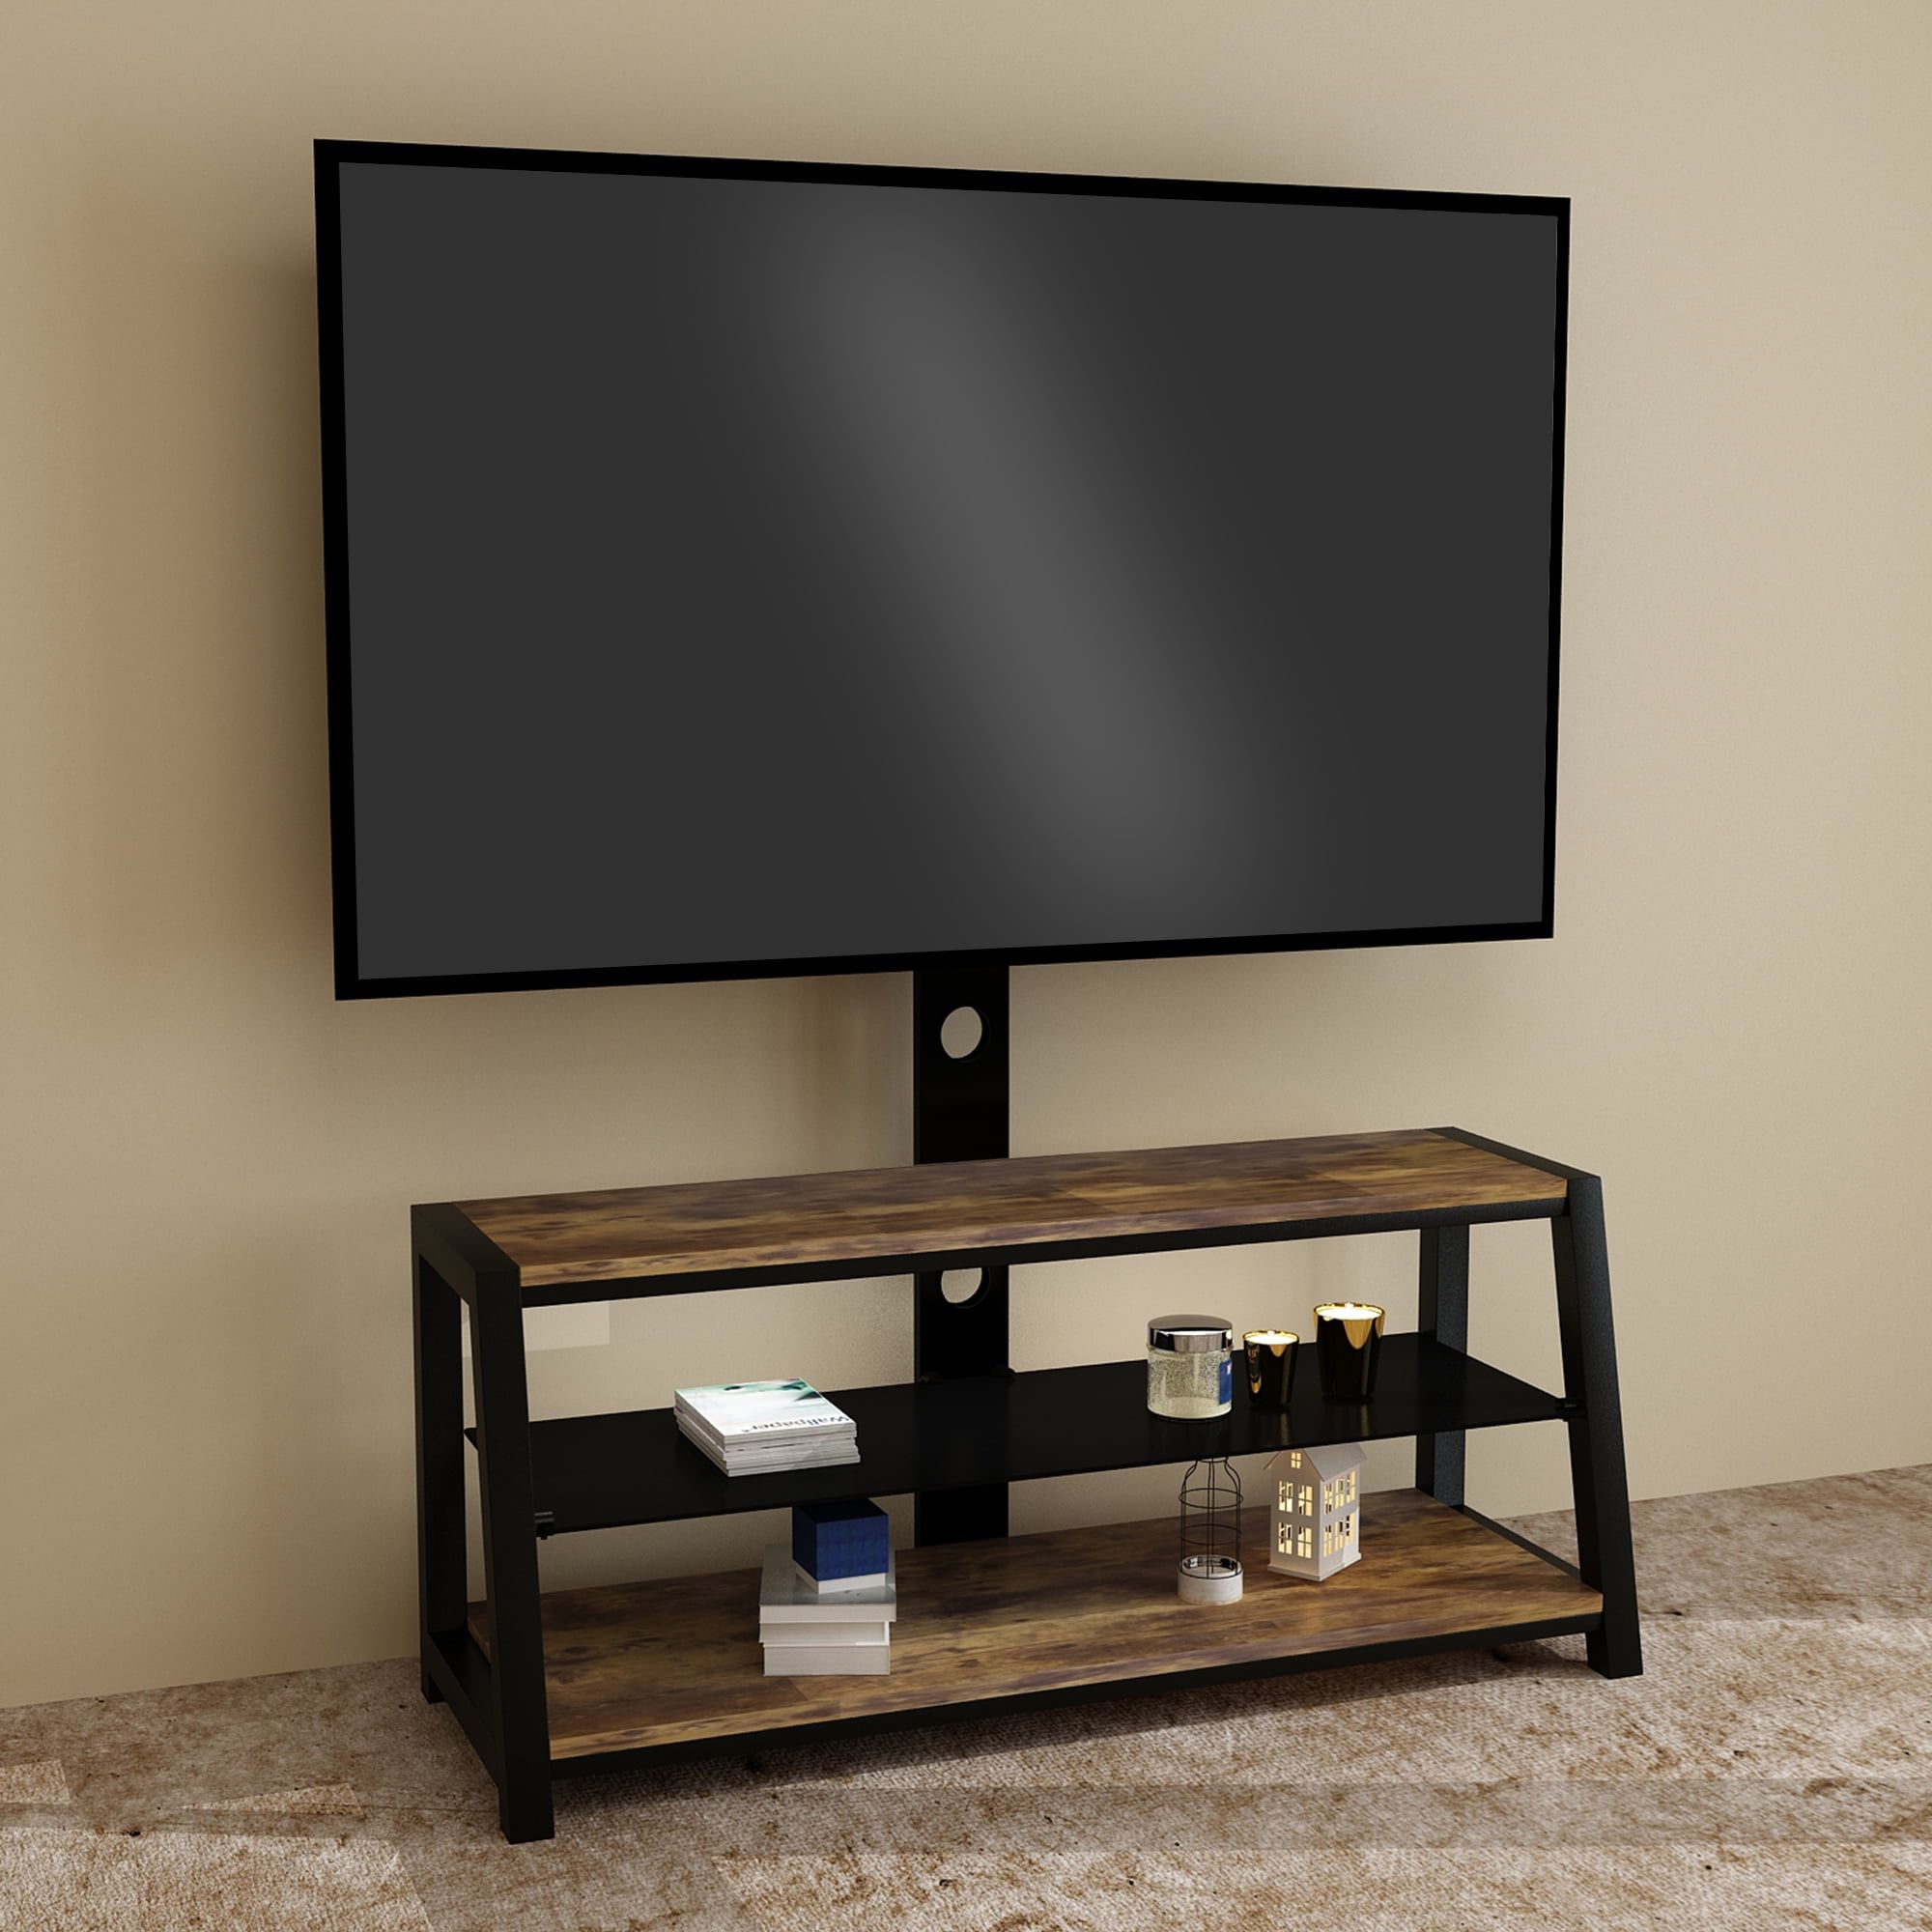 Veryke 3 Tier Tv Stand With Floater Mount For Tvs Up To 65", Rustic Inside Tier Stands For Tvs (Gallery 1 of 20)